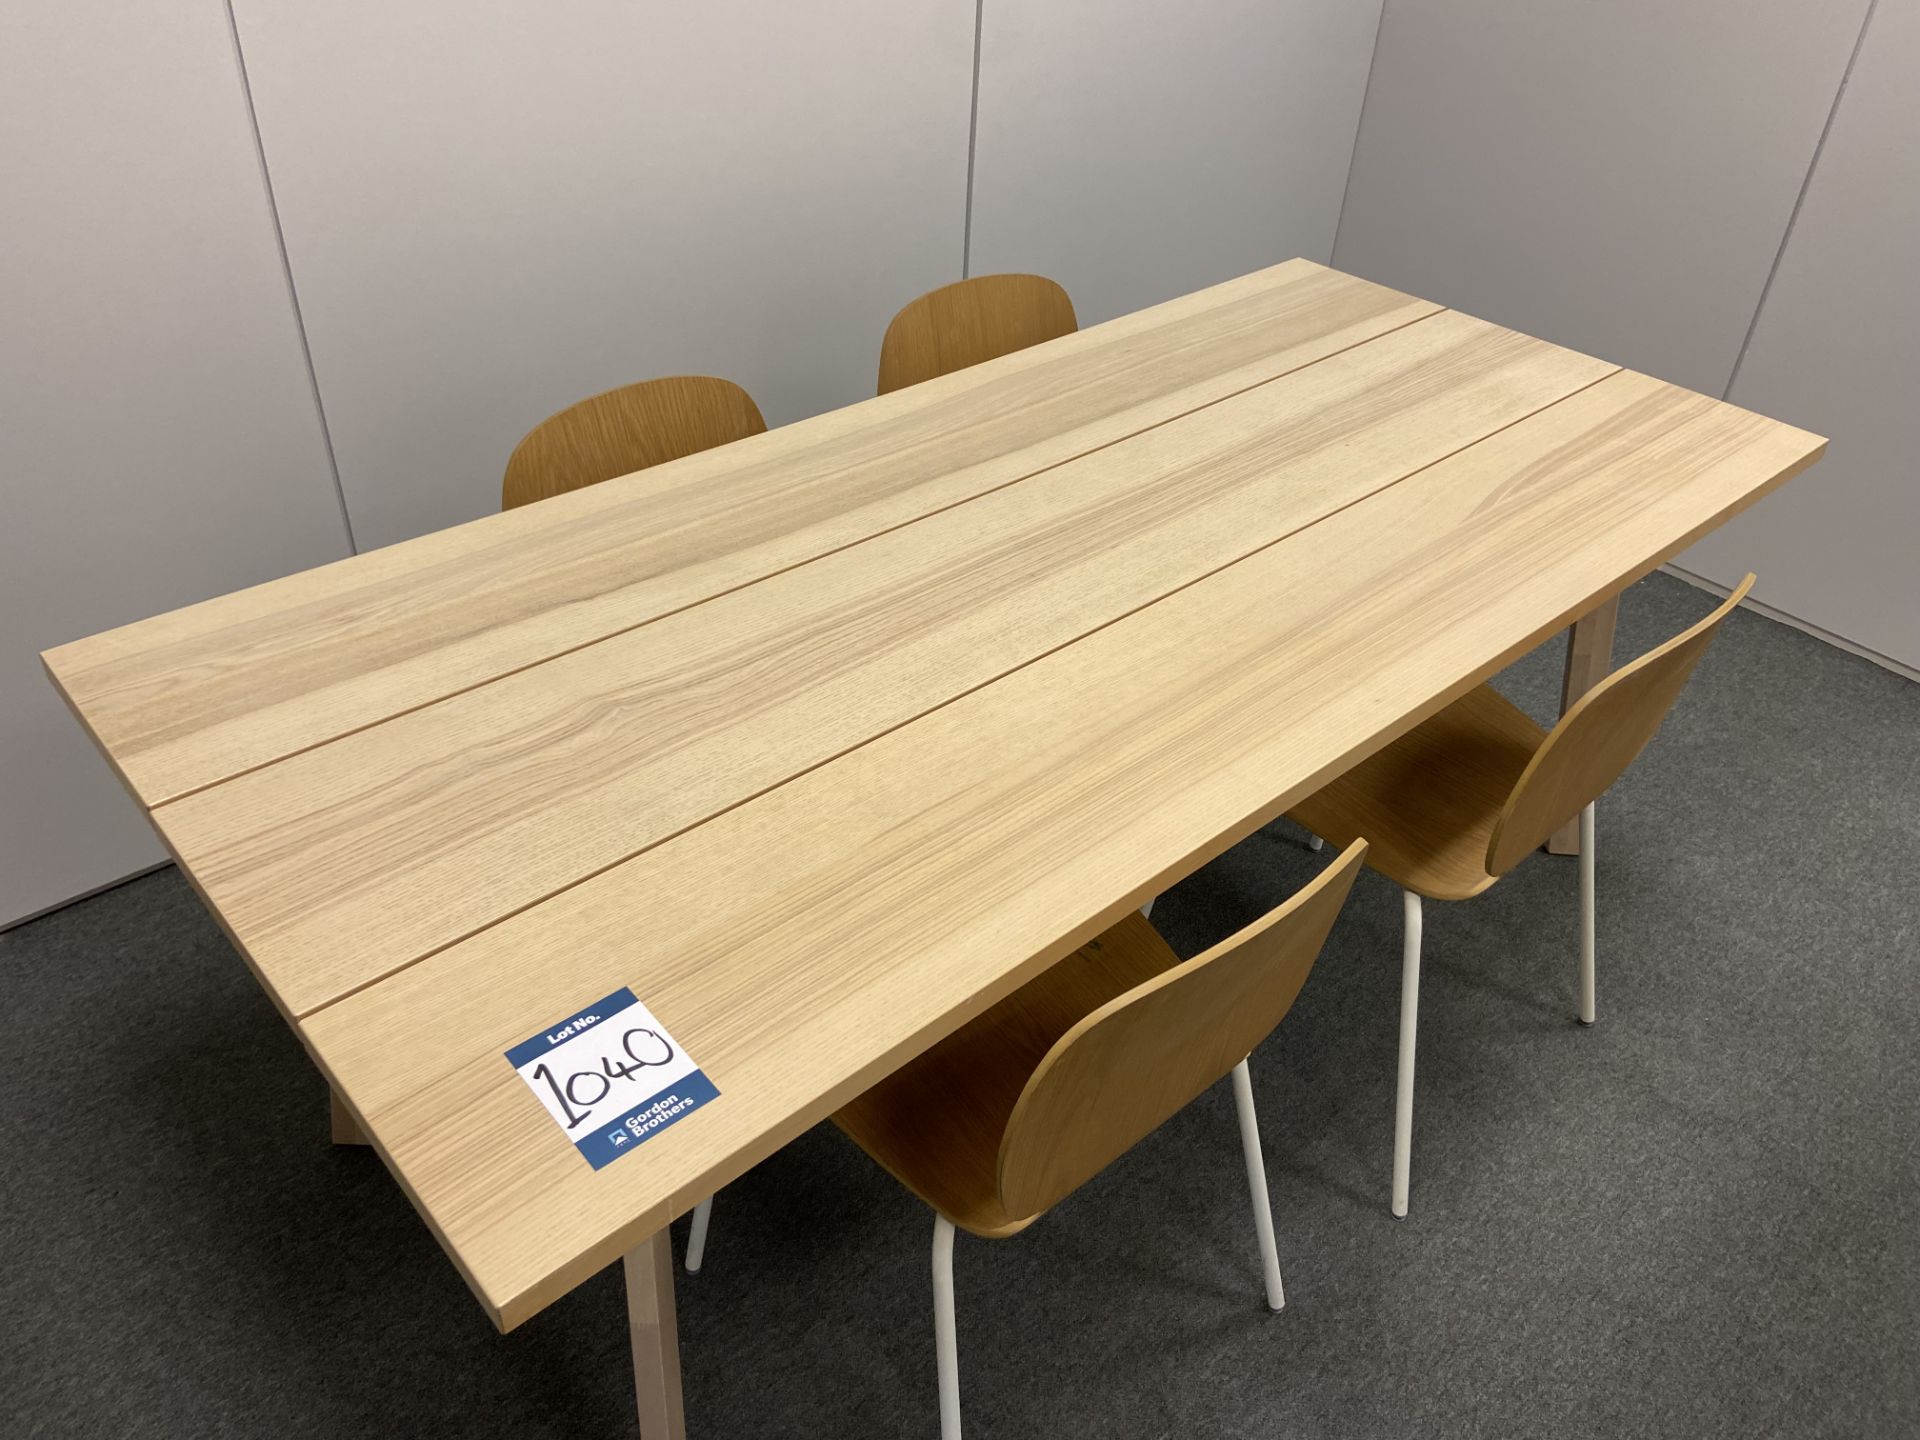 Lot comprisng: a meeting table and four chairs